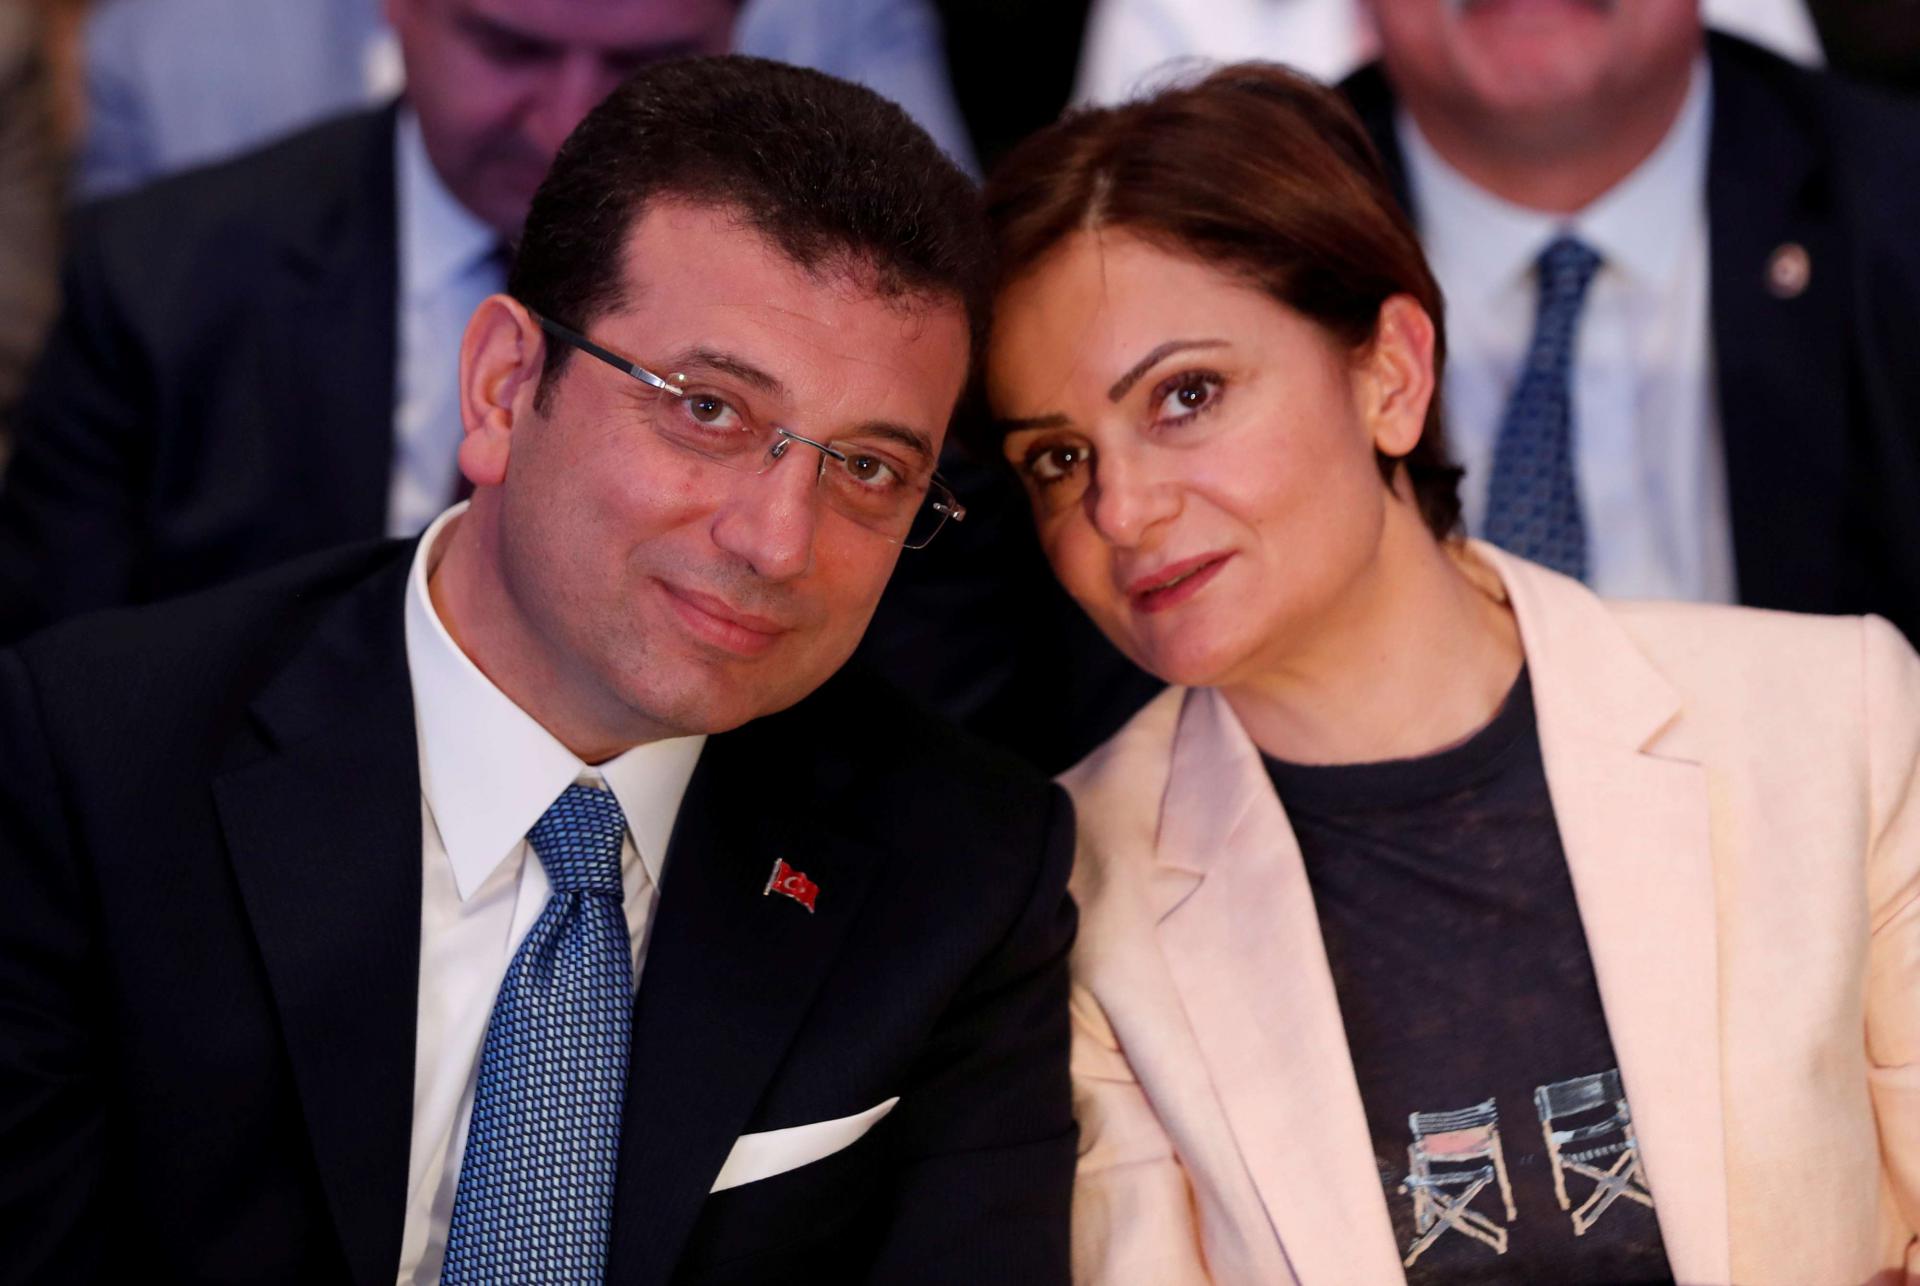 Kaftancioglu pictured with Ekrem Imamoglu, main opposition Republican People's Party (CHP) Istanbul mayoral election winner